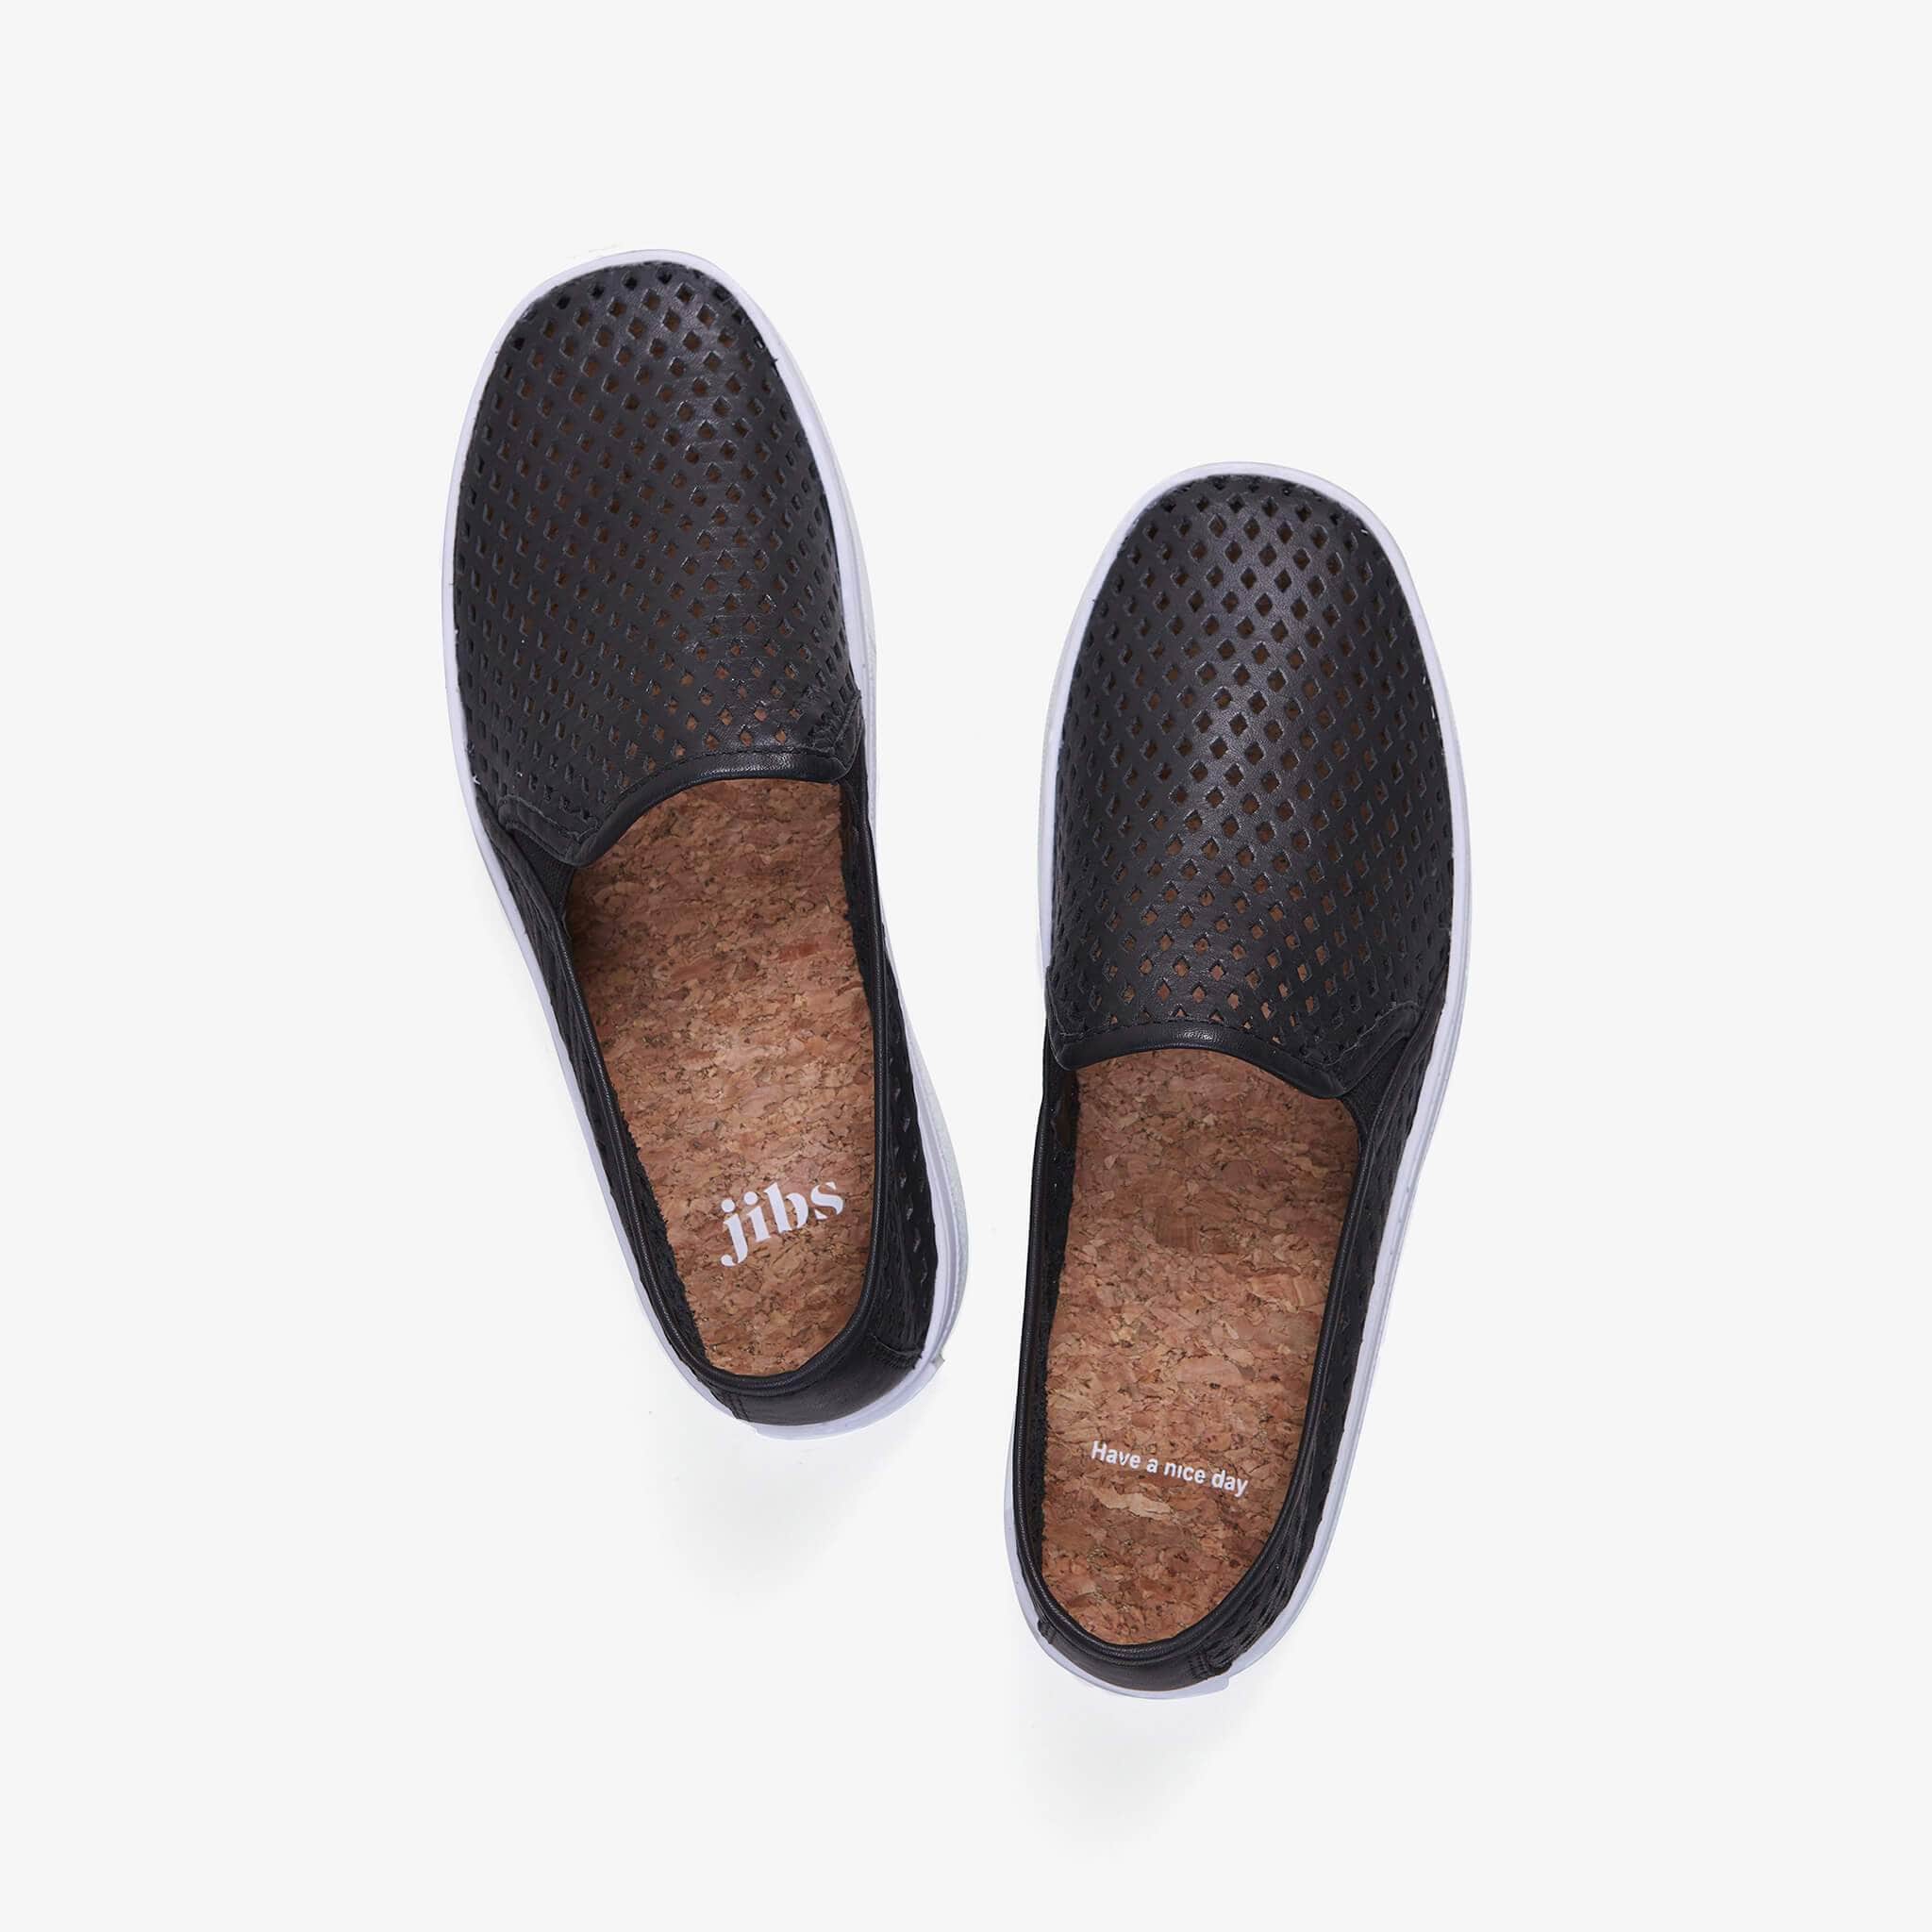 Jibs Classic Jet Black Slip On Sneaker-Shoe Top Have A Nice Day Cork In-sole